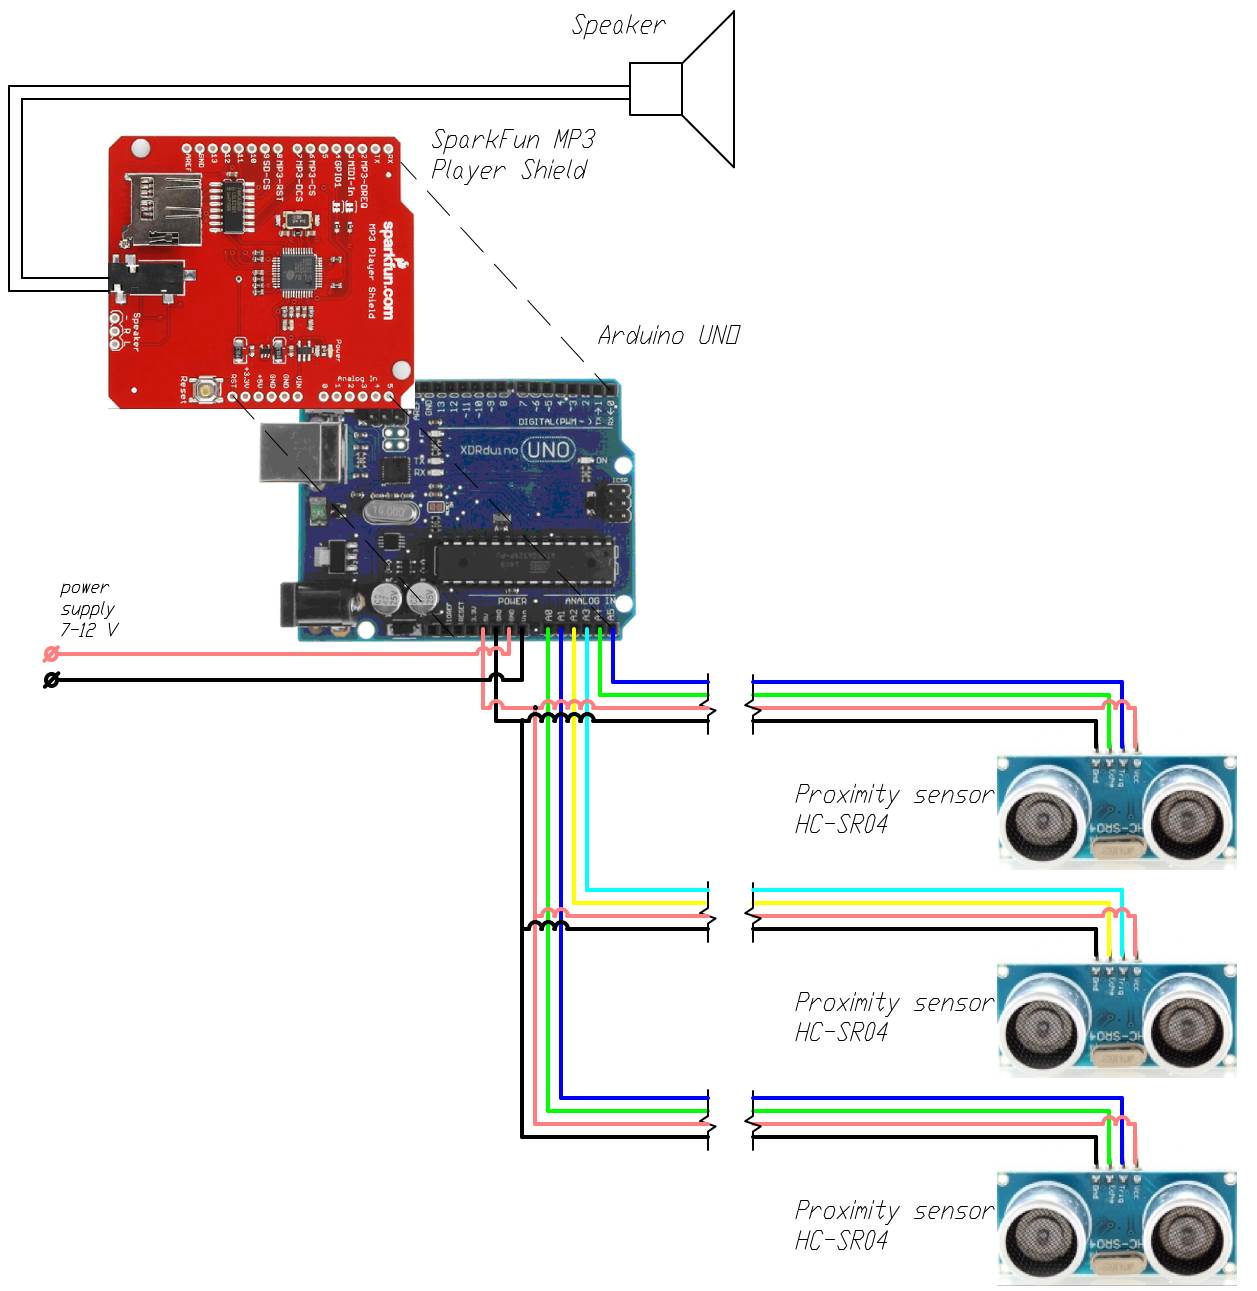 Wiring diagram of alarm system with 3 ultrasonic sensors